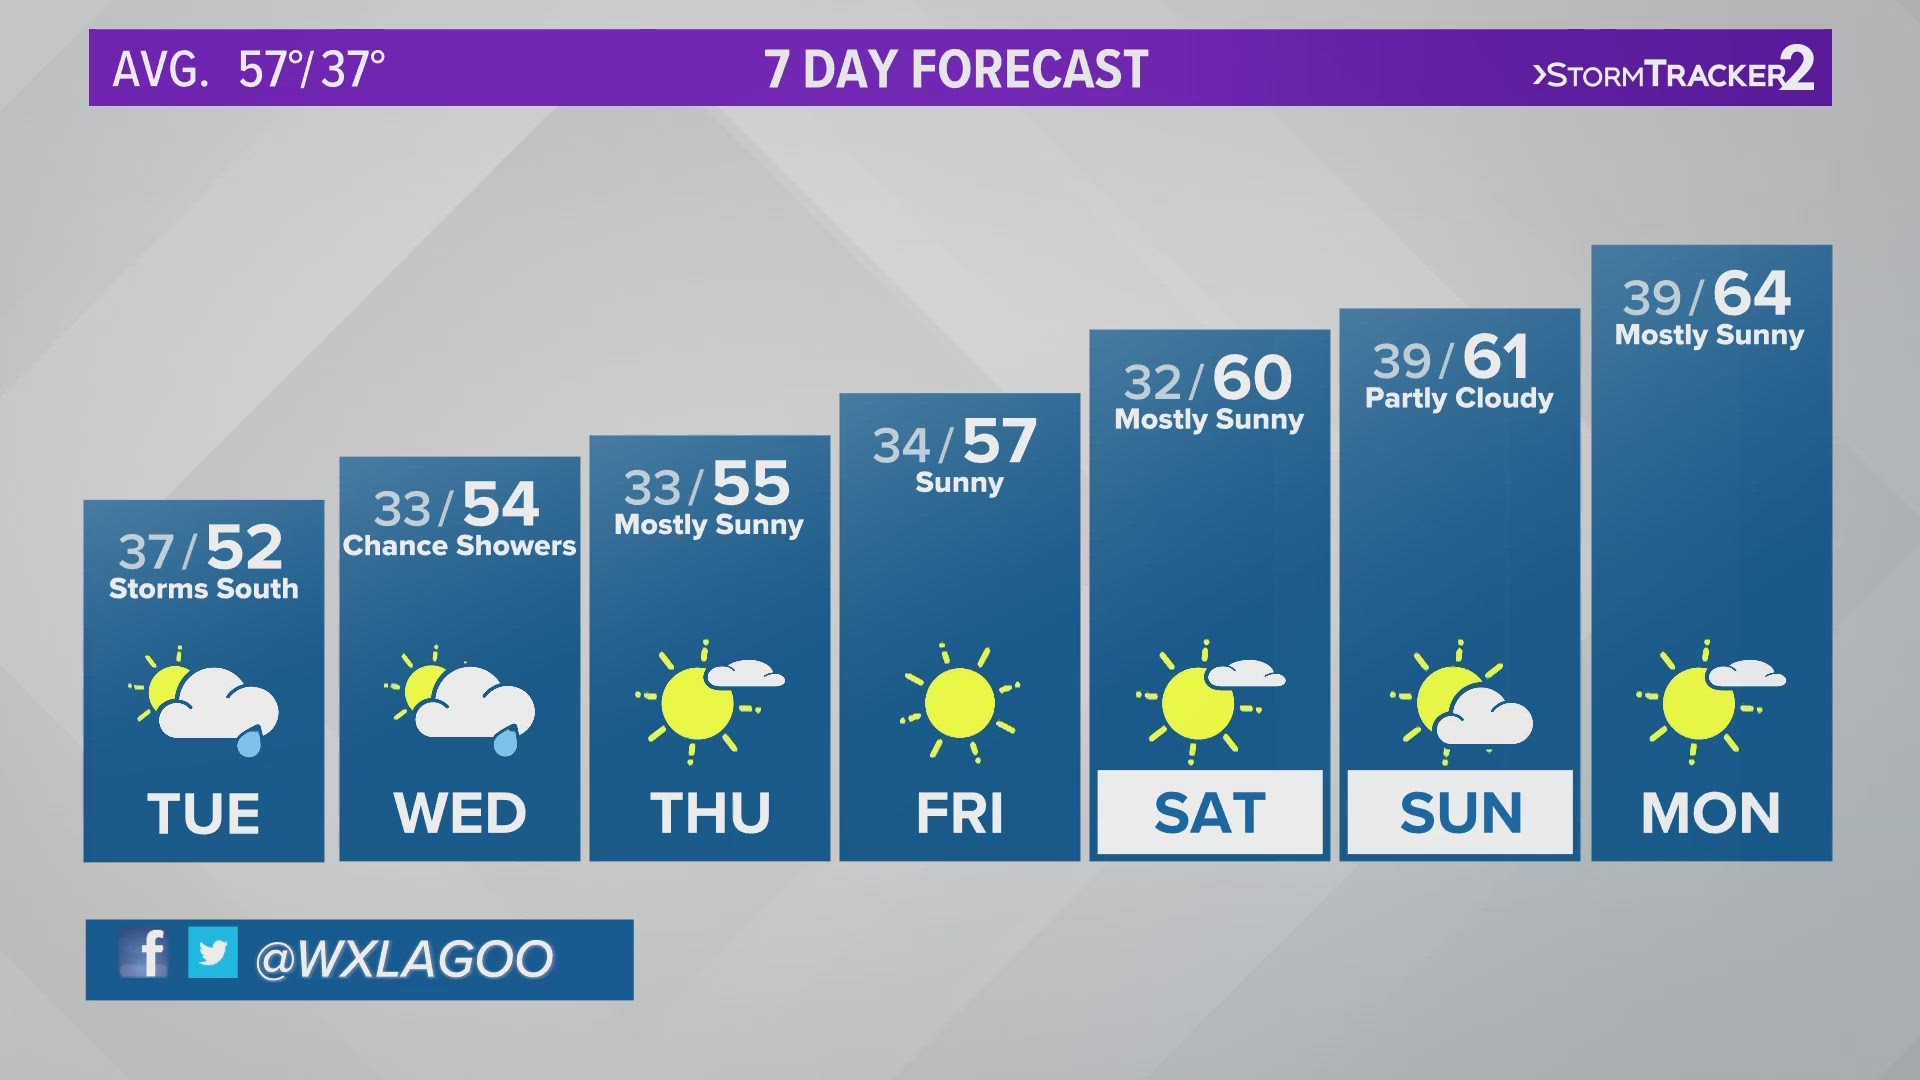 Temperatures fall into the 50s this week as scattered showers return to the forecast.